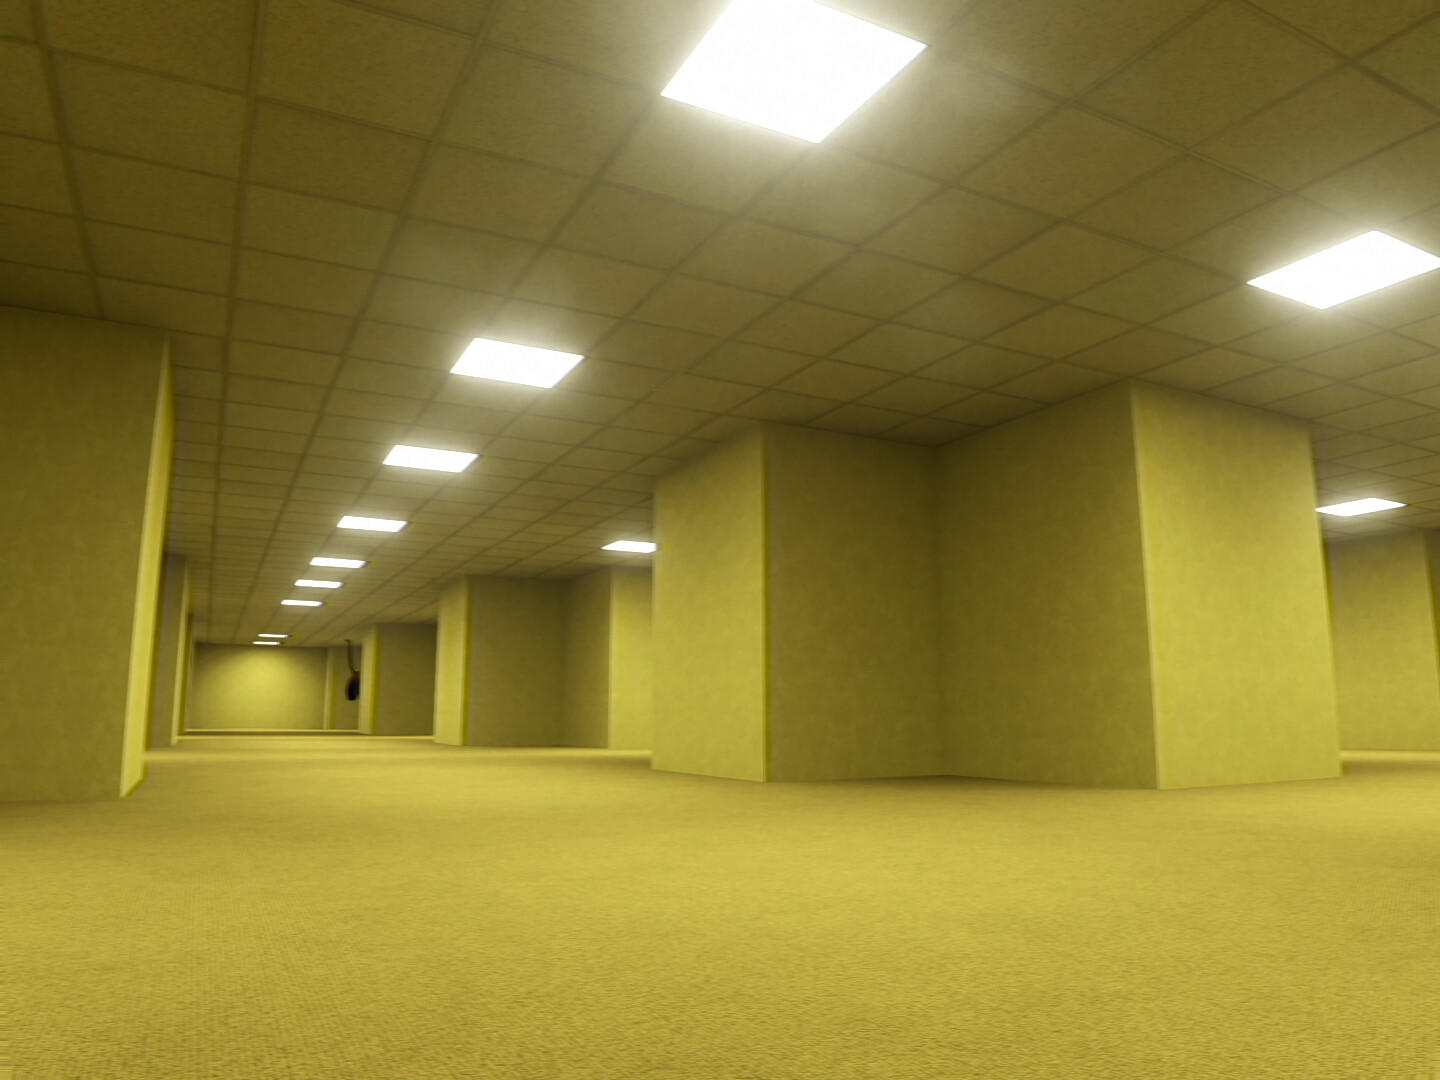 REALISTIC The Backrooms Found Footage Simulator 